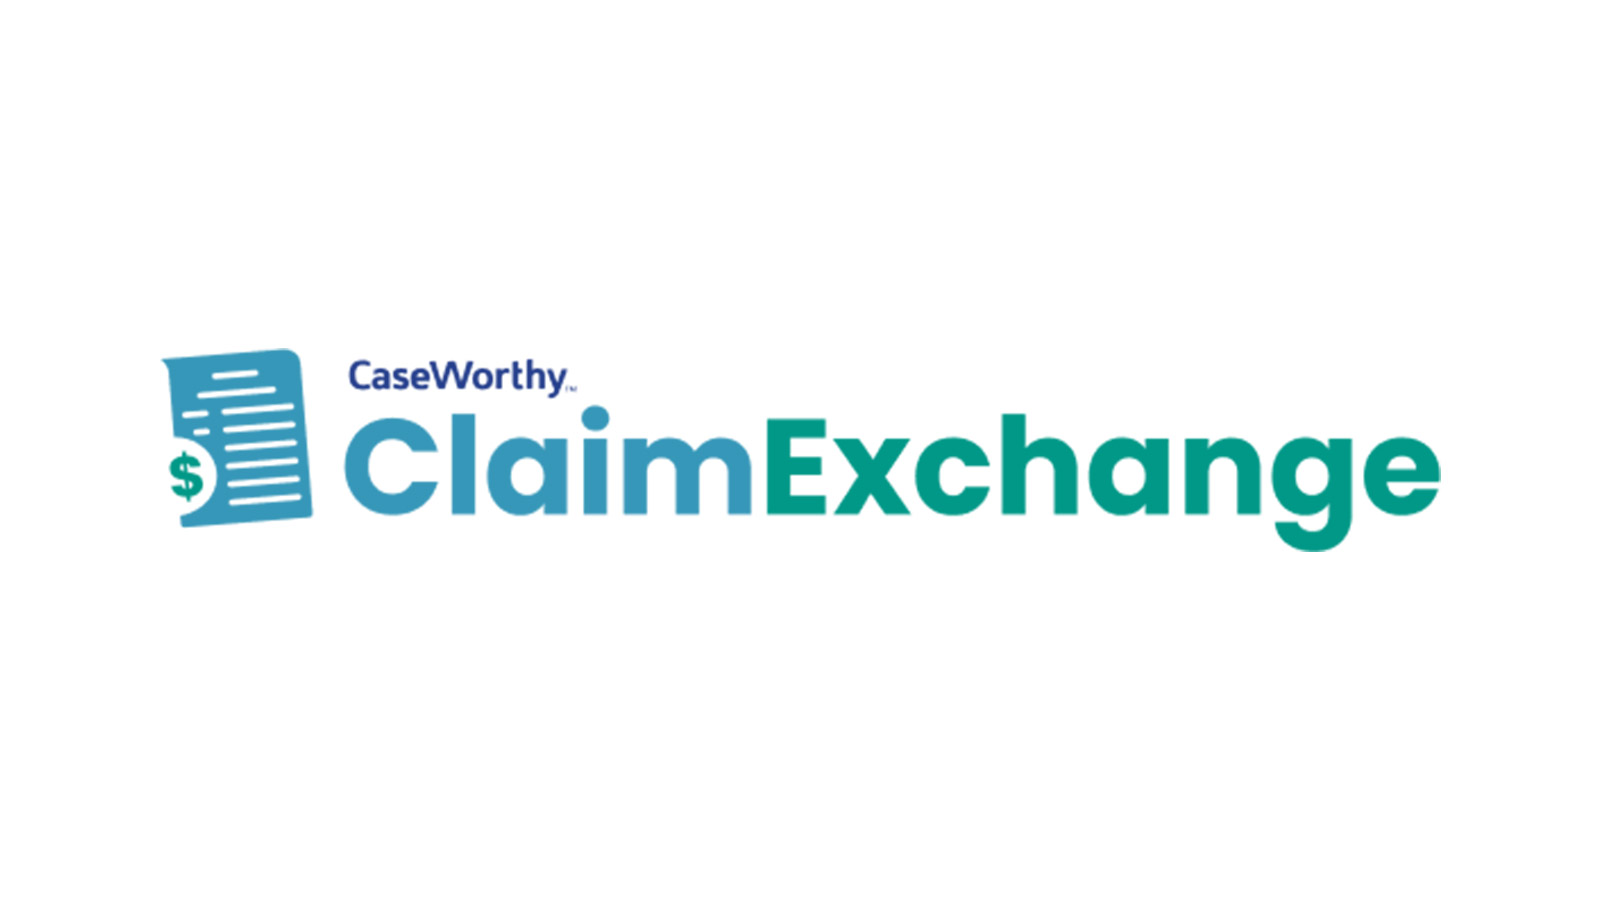 Introducing ClaimExchange: CaseWorthy's Innovative Solution Simplifying Medicaid and Healthcare Billing 